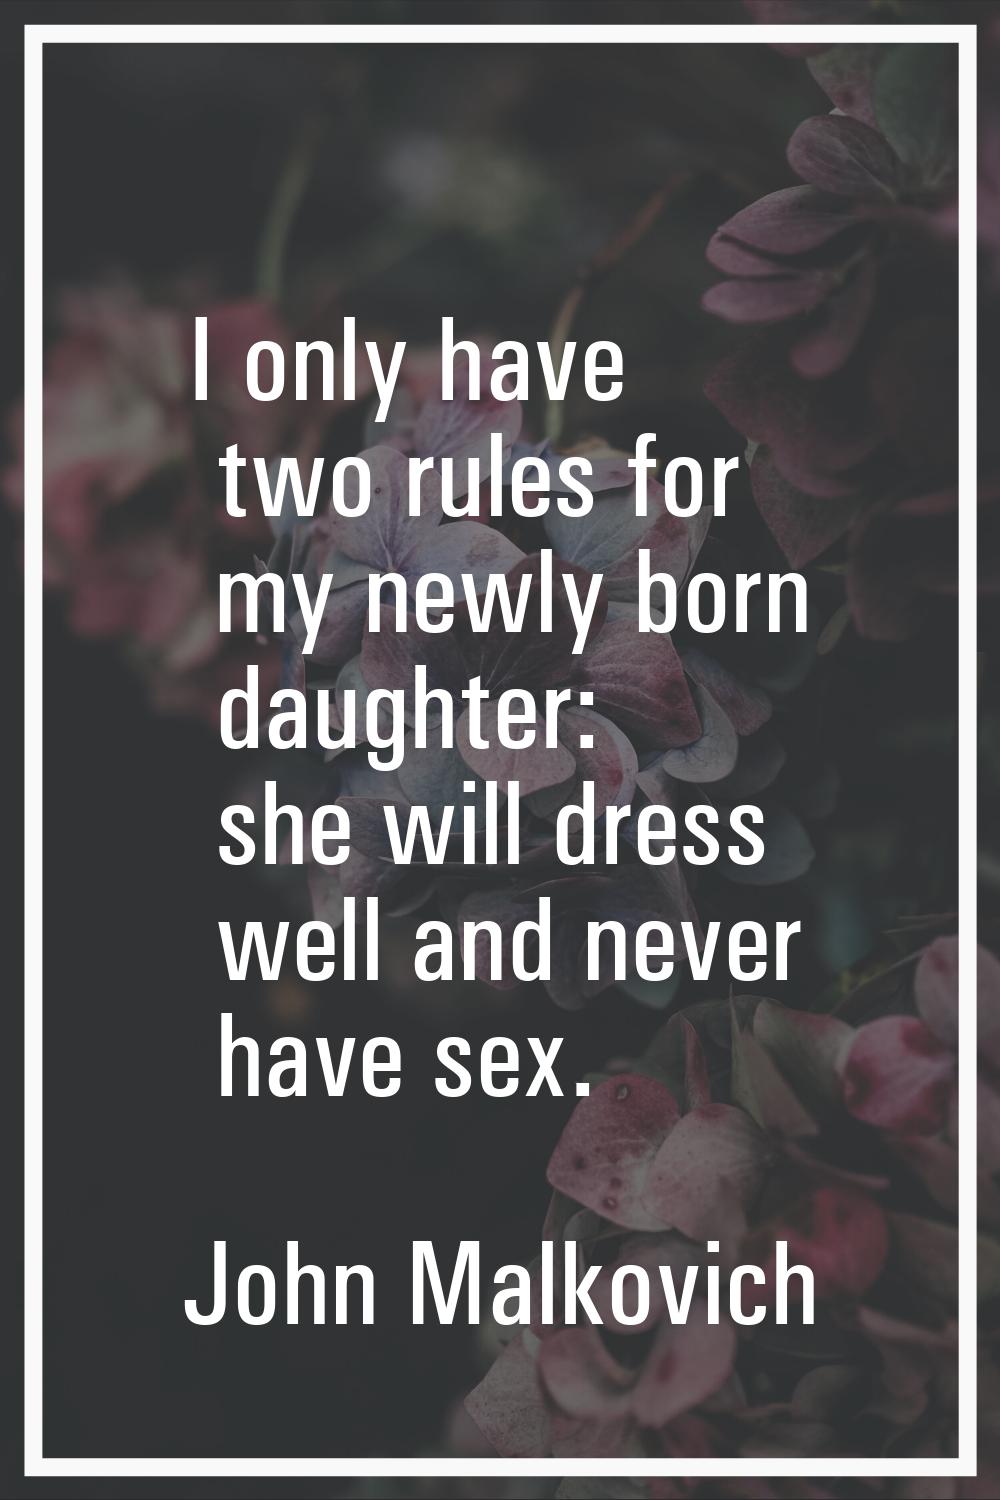 I only have two rules for my newly born daughter: she will dress well and never have sex.